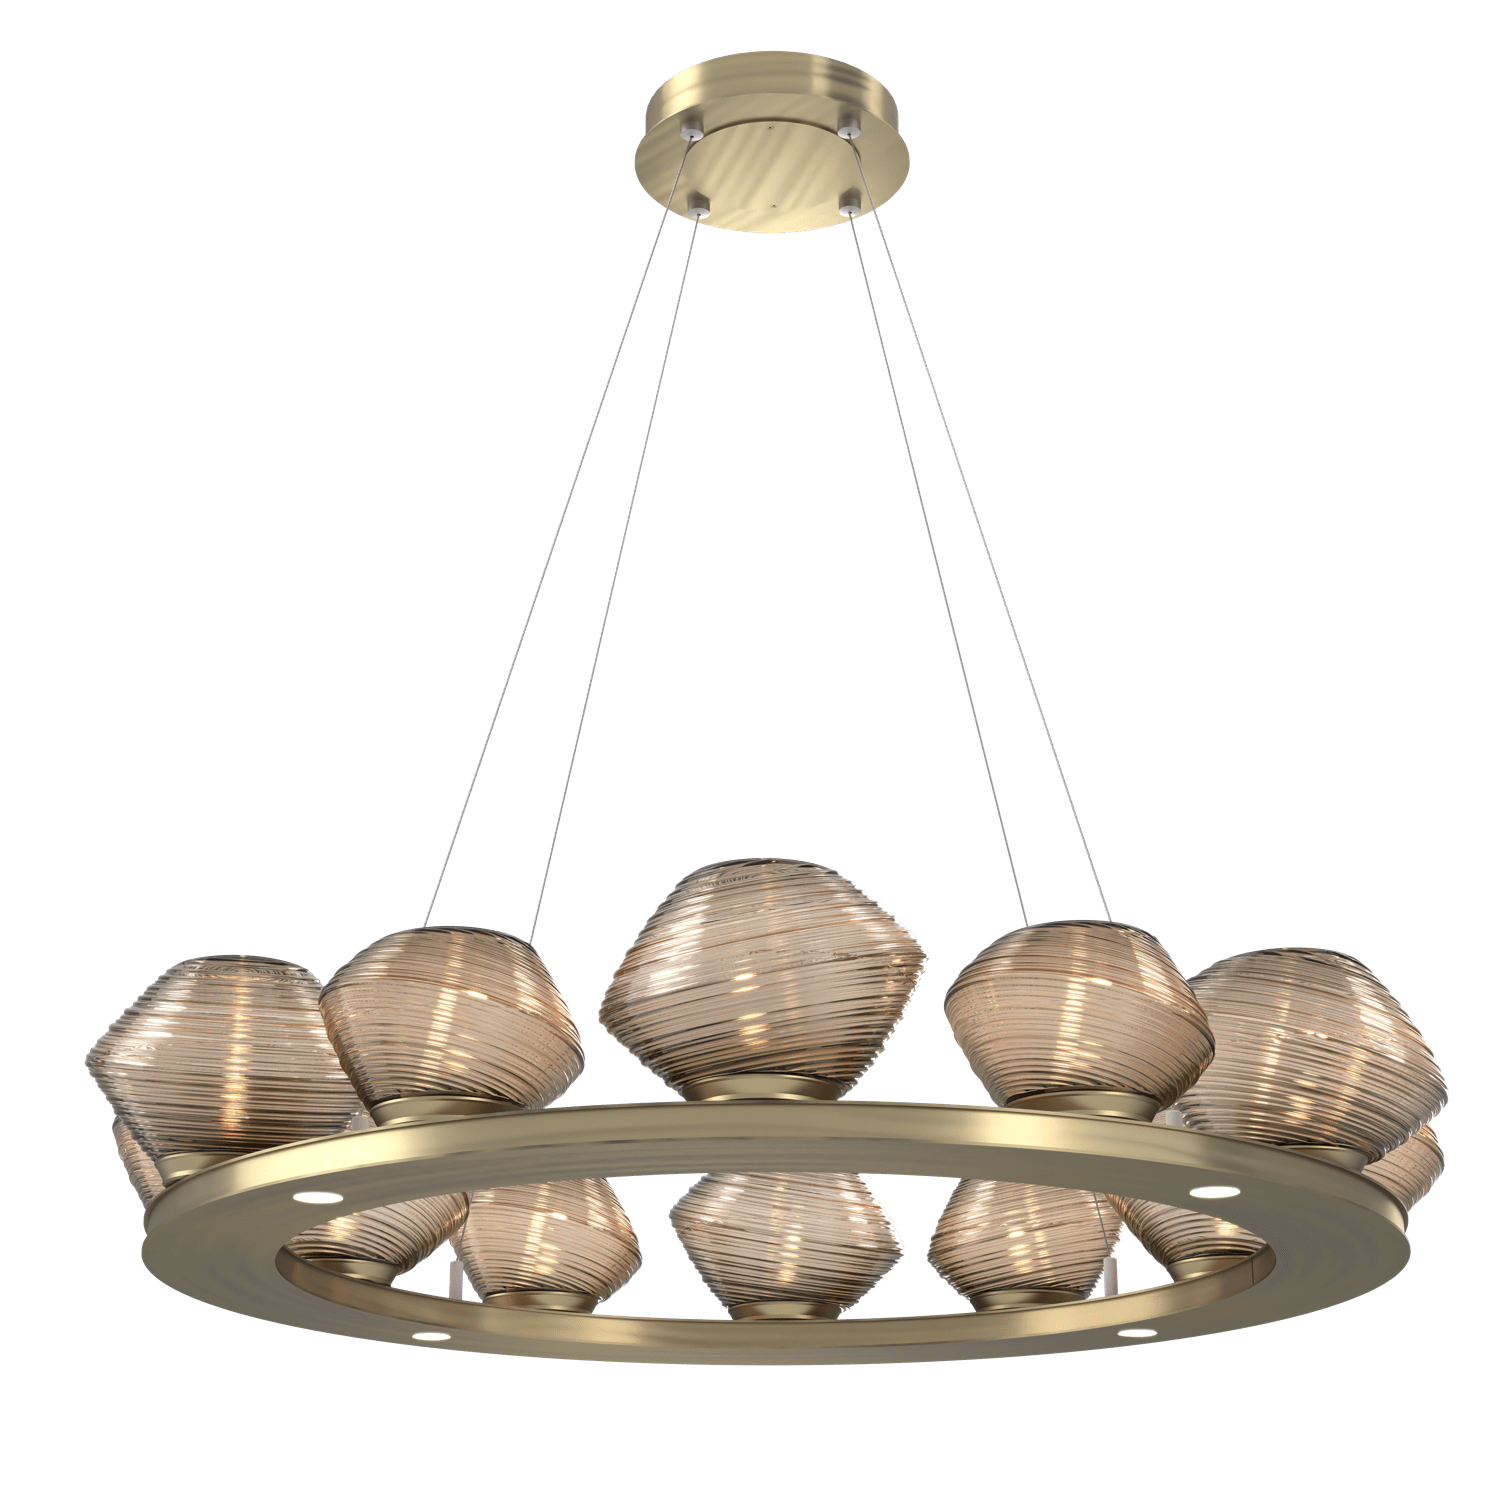 CHB0089-0C-HB-B-Hammerton-Studio-Mesa-36-inch-ring-chandelier-with-heritage-brass-finish-and-bronze-blown-glass-shades-and-LED-lamping